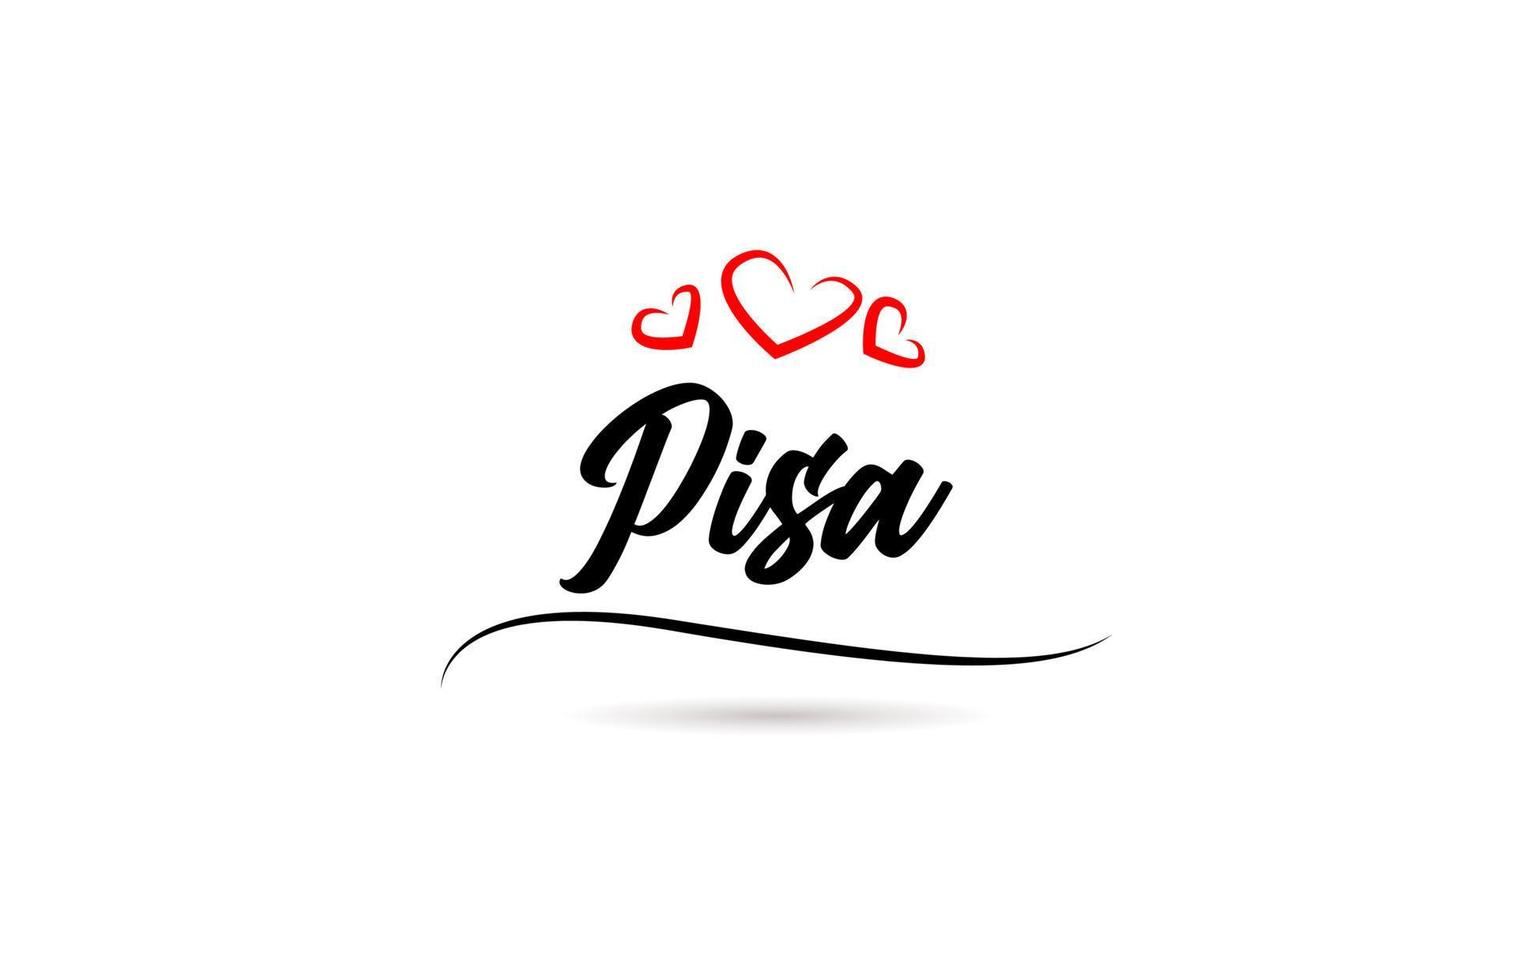 Pisa european city typography text word with love. Hand lettering style. Modern calligraphy text vector